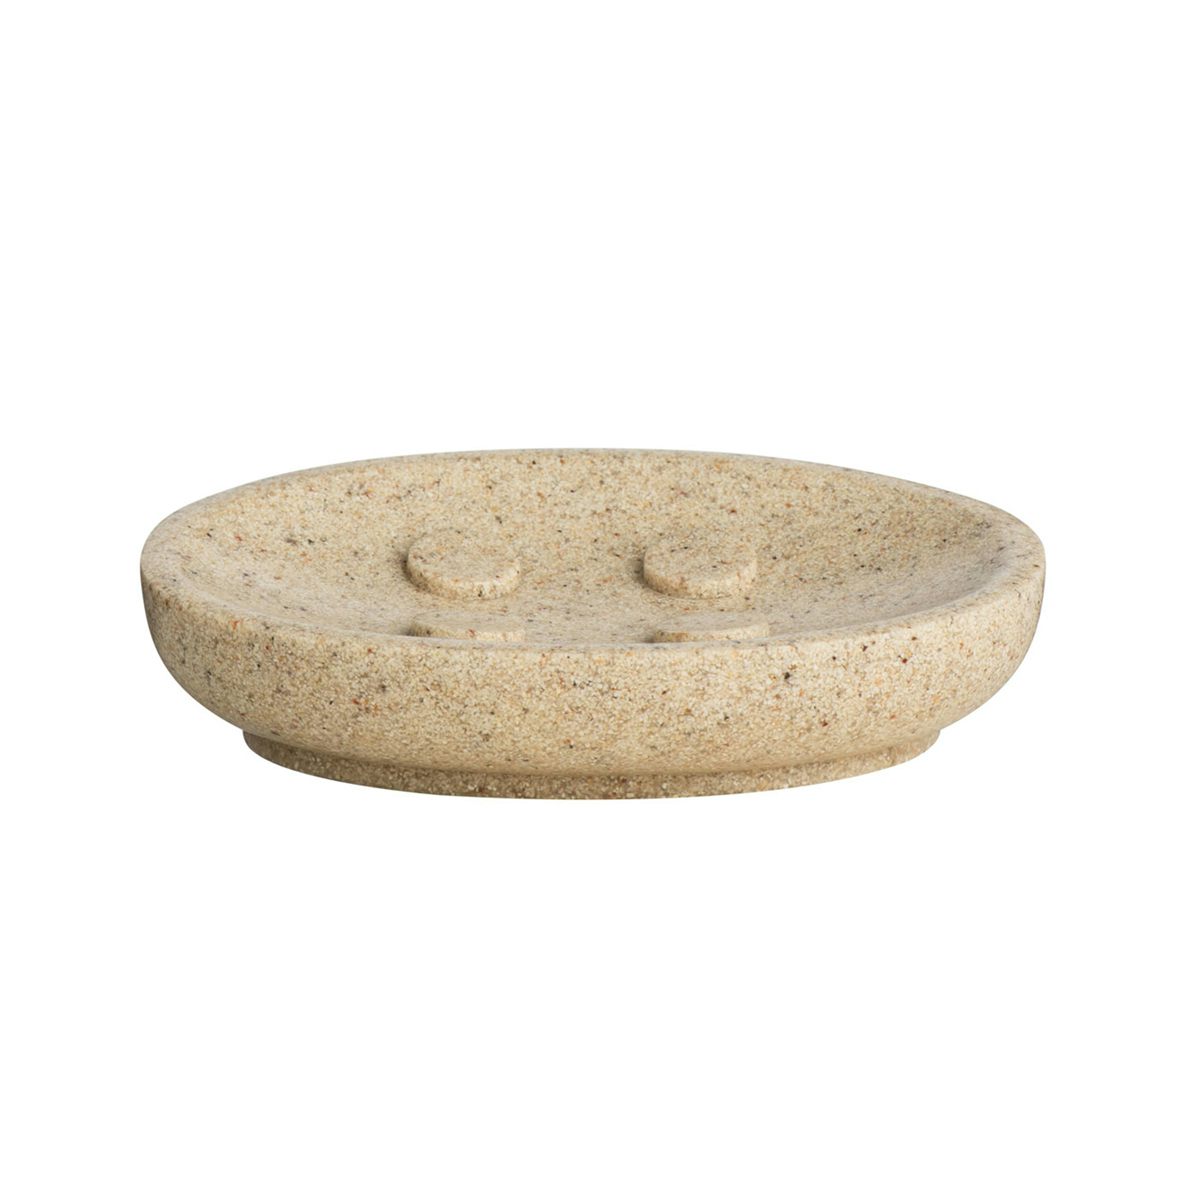 Accents Mineral Stone effect resin soap dish